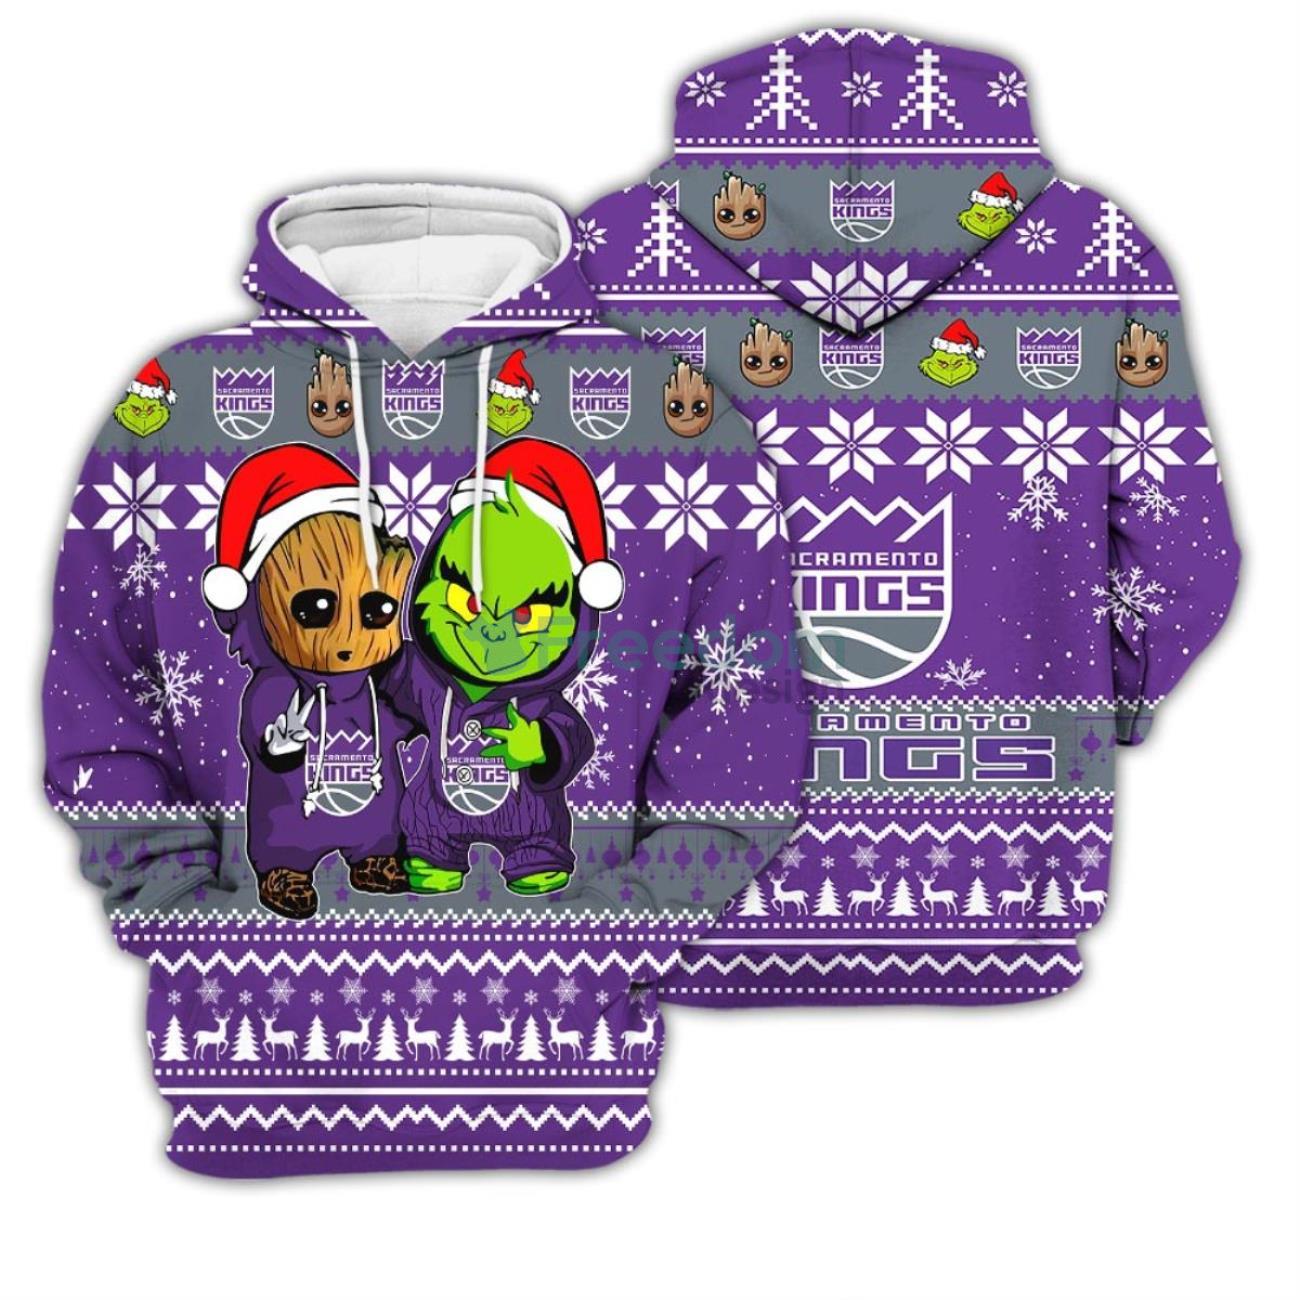 Sacramento Kings Baby Groot And Grinch Ugly Christmas Sweaters